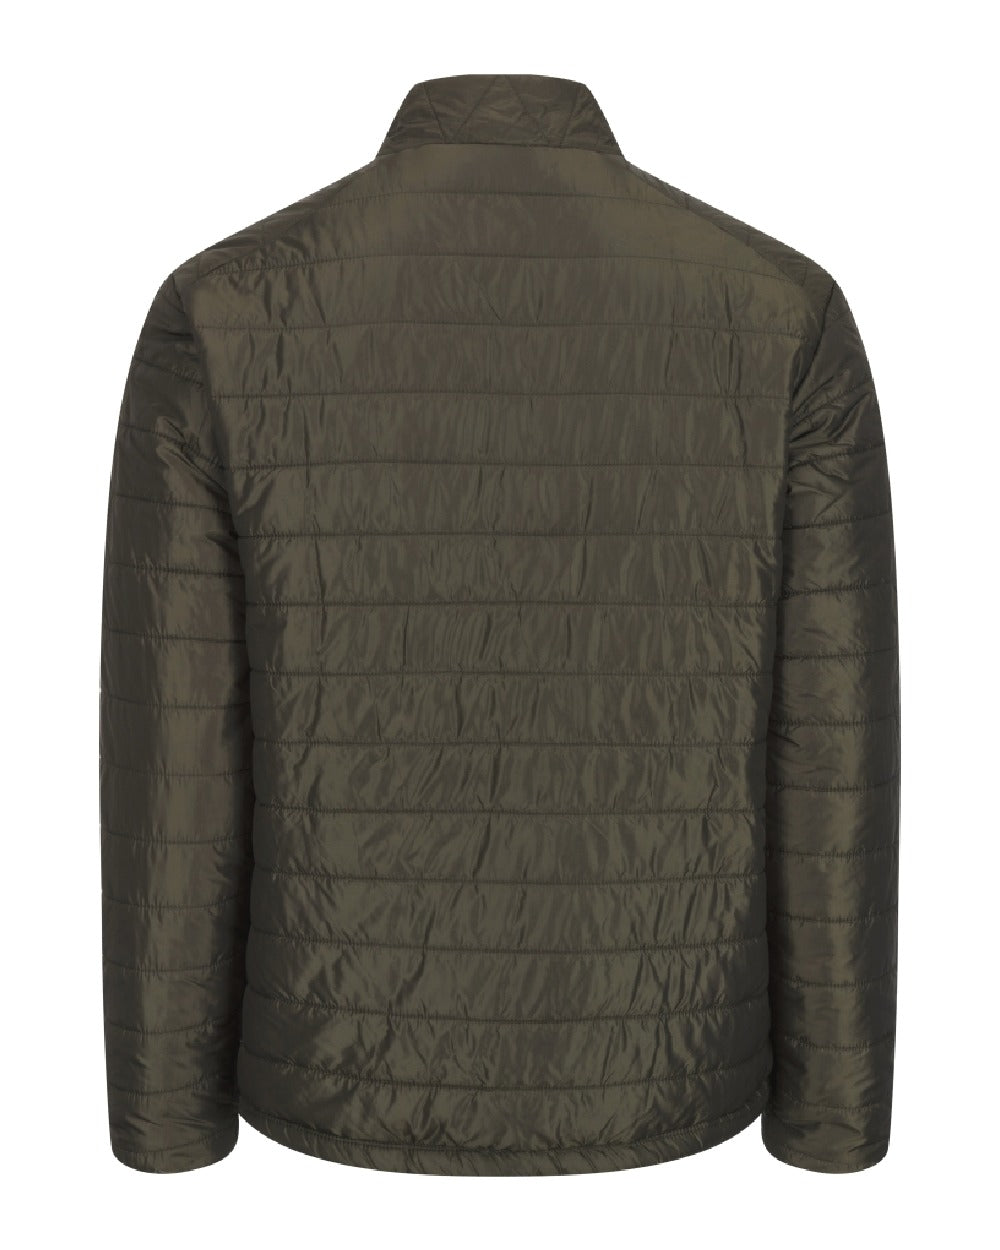 Olive/Merlot coloured Hoggs of Fife Kingston Lightweight Quilted Jacket on white background 